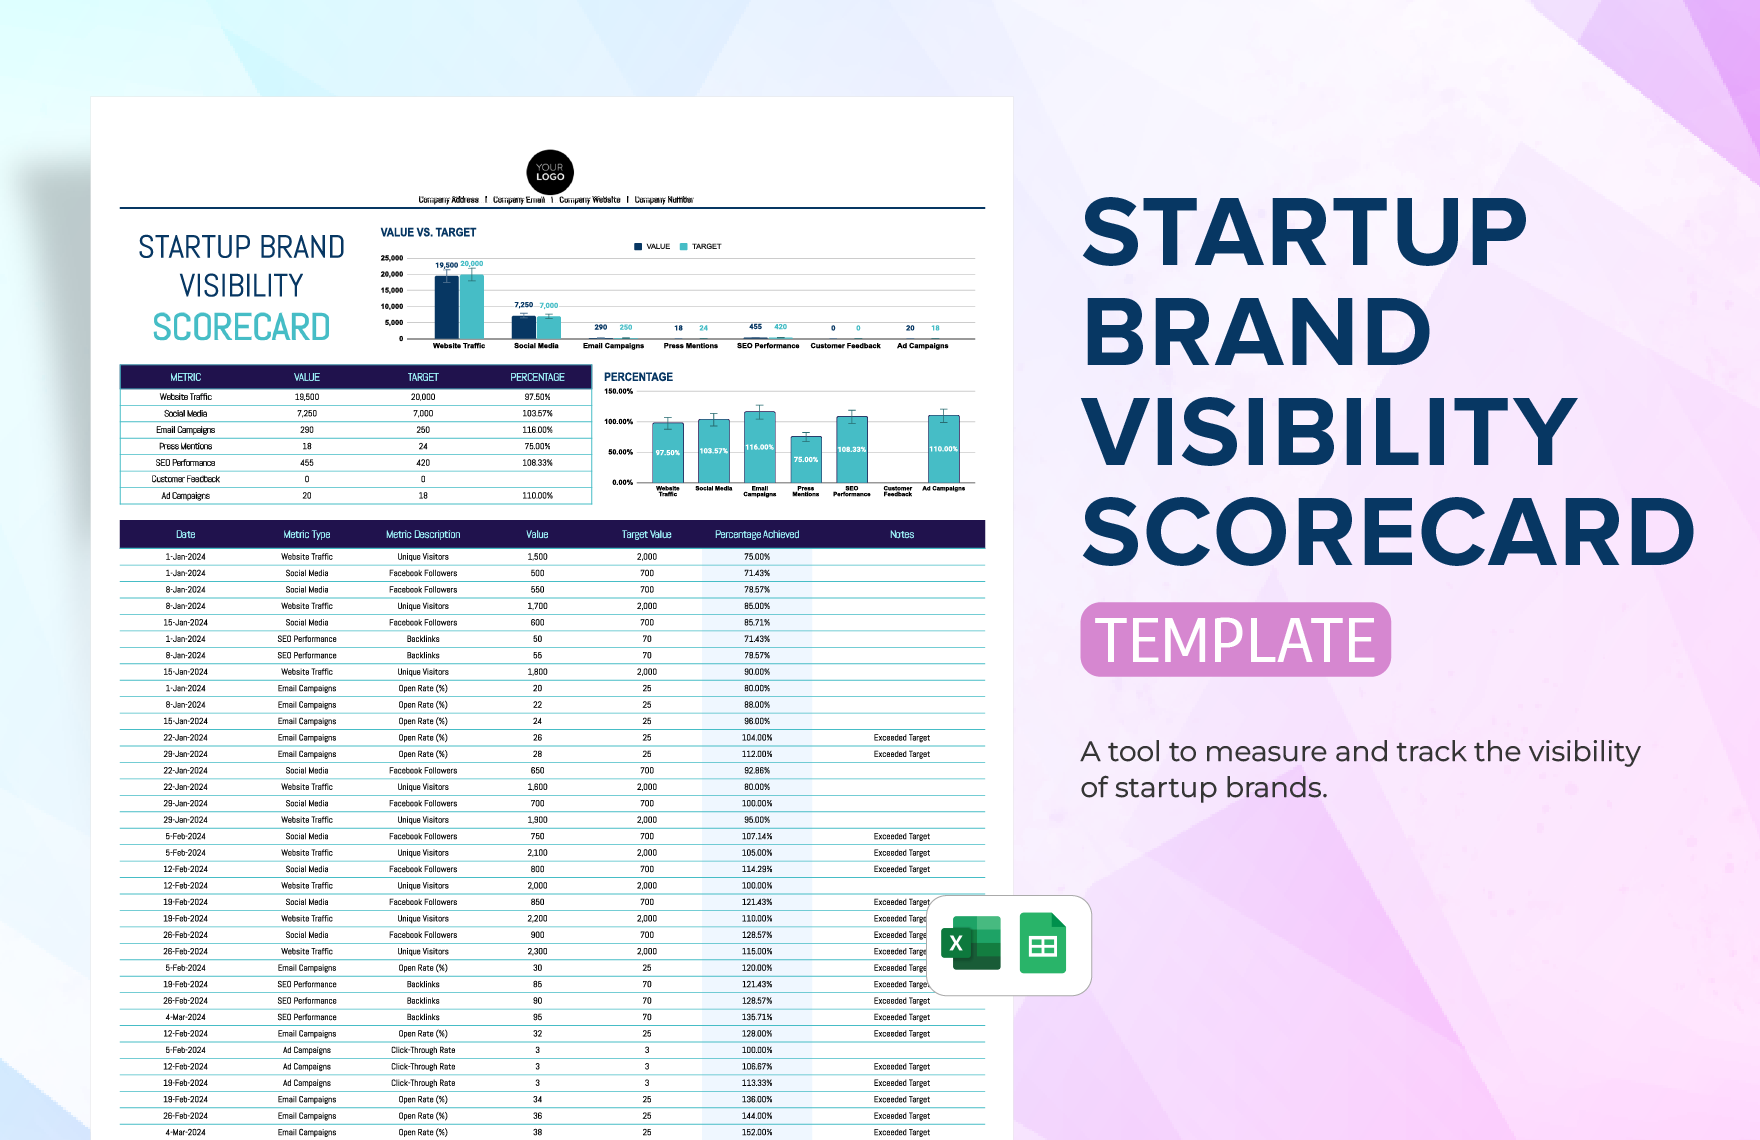 Startup Brand Visibility Scorecard Template in Excel, Google Sheets